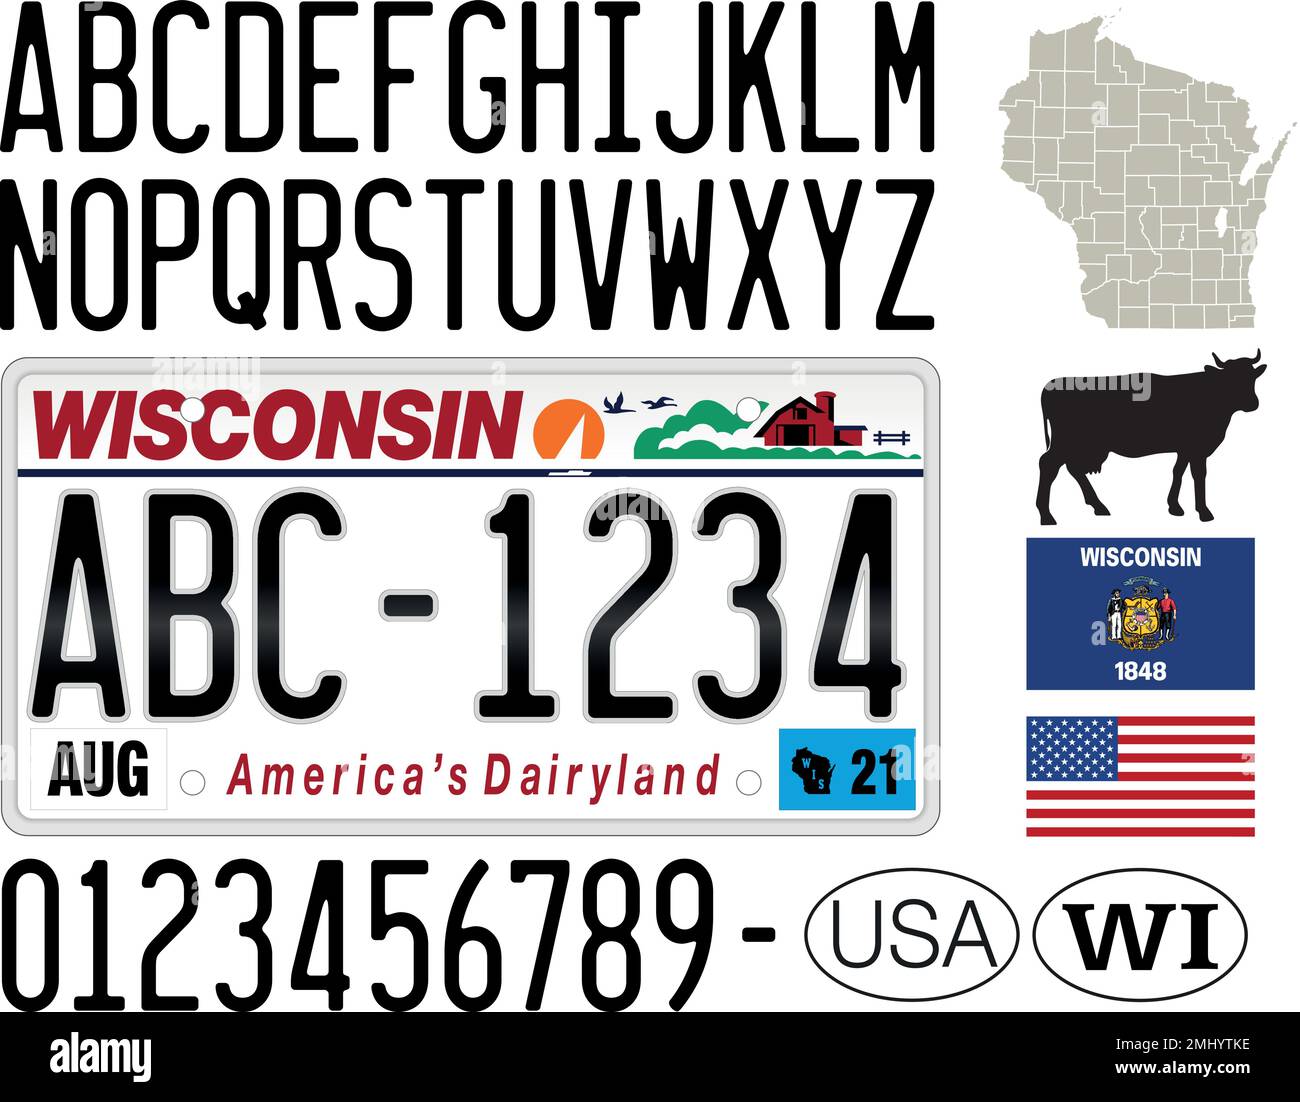 Wisconsin license plate, letters, numbers and symbols, USA, United States of America, vector illustration Stock Vector